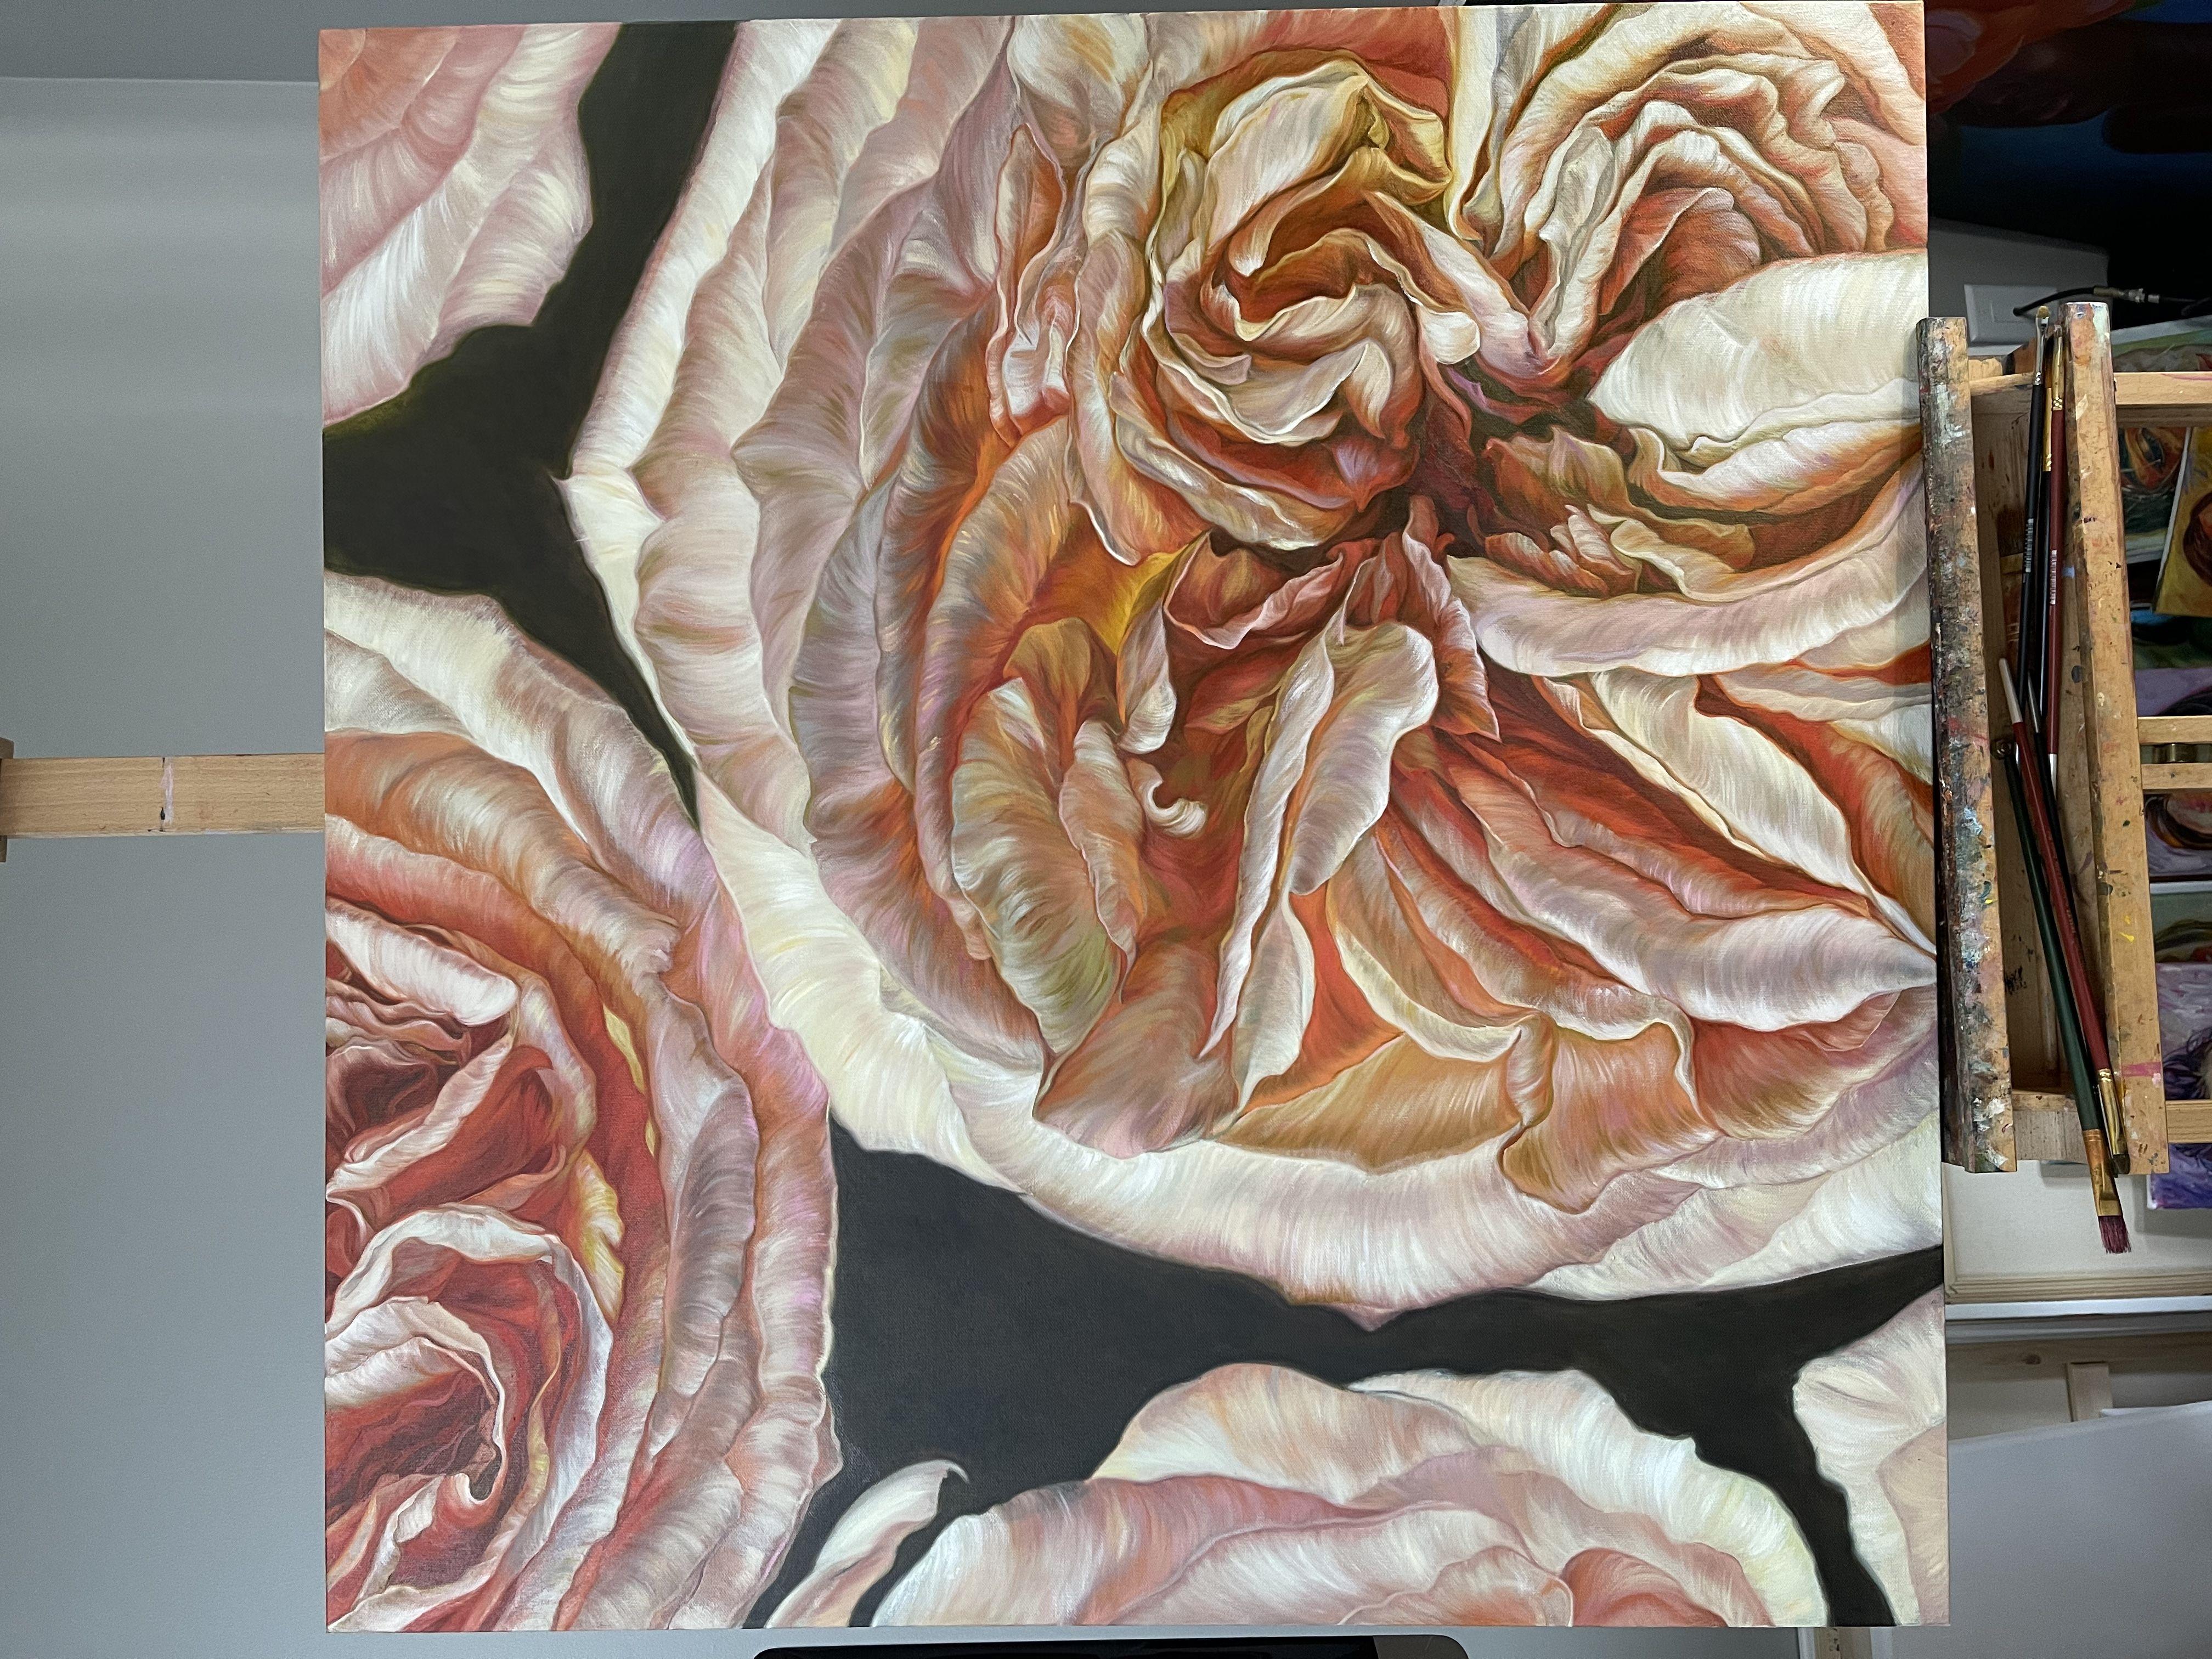 Peony roses. Flowers with lots of details are my favorite theme to embody on canvas. Such a work of art always attracts the eyes, it is interesting to study and consider :: Painting :: Realism :: This piece comes with an official certificate of